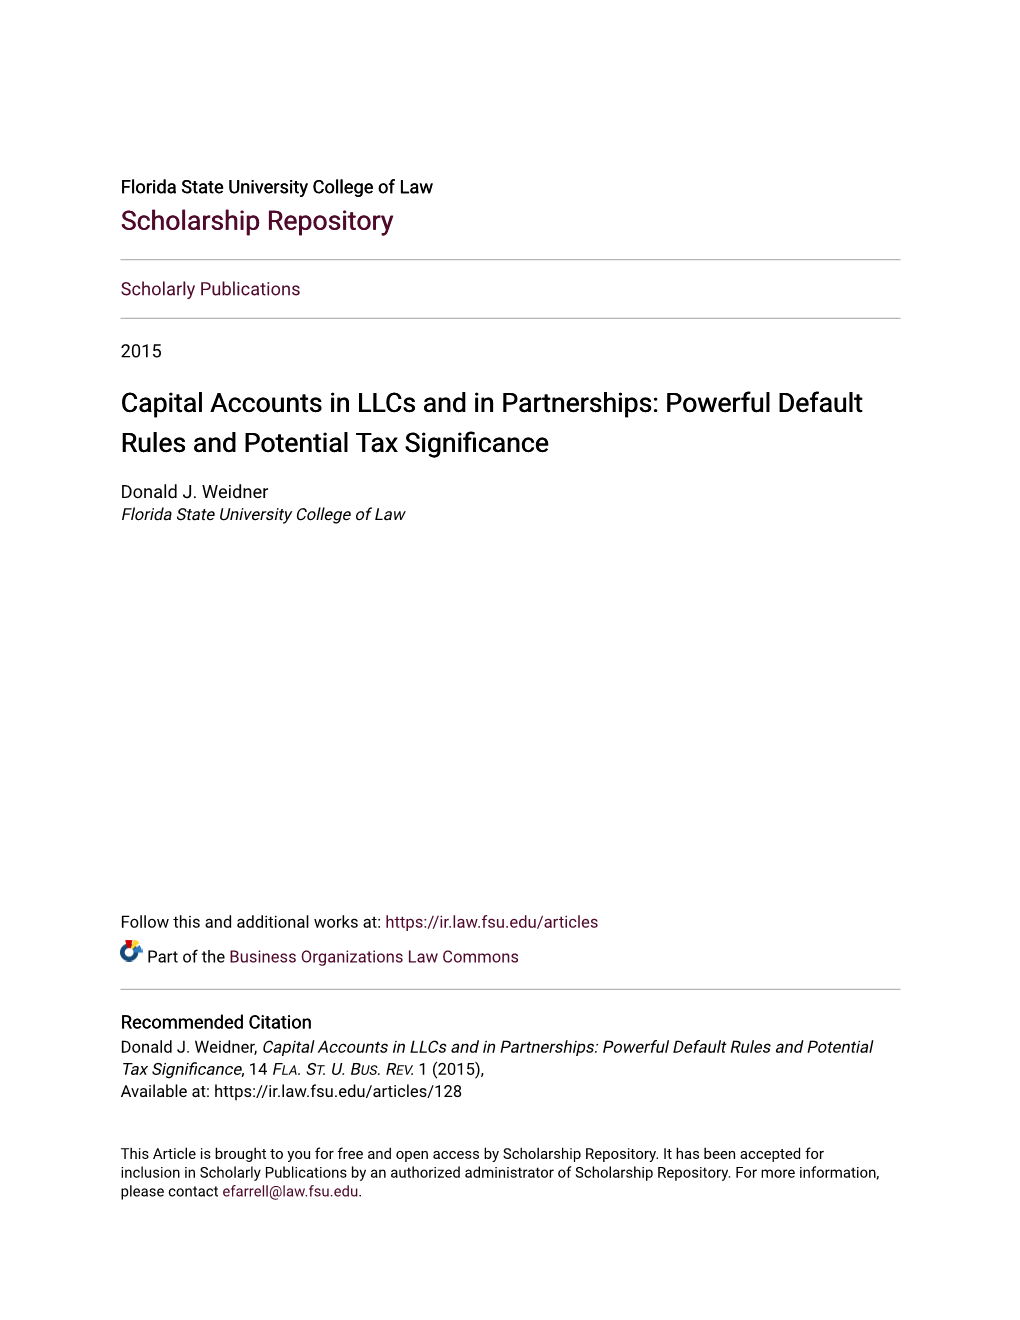 Capital Accounts in Llcs and in Partnerships: Powerful Default Rules and Potential Tax Significance